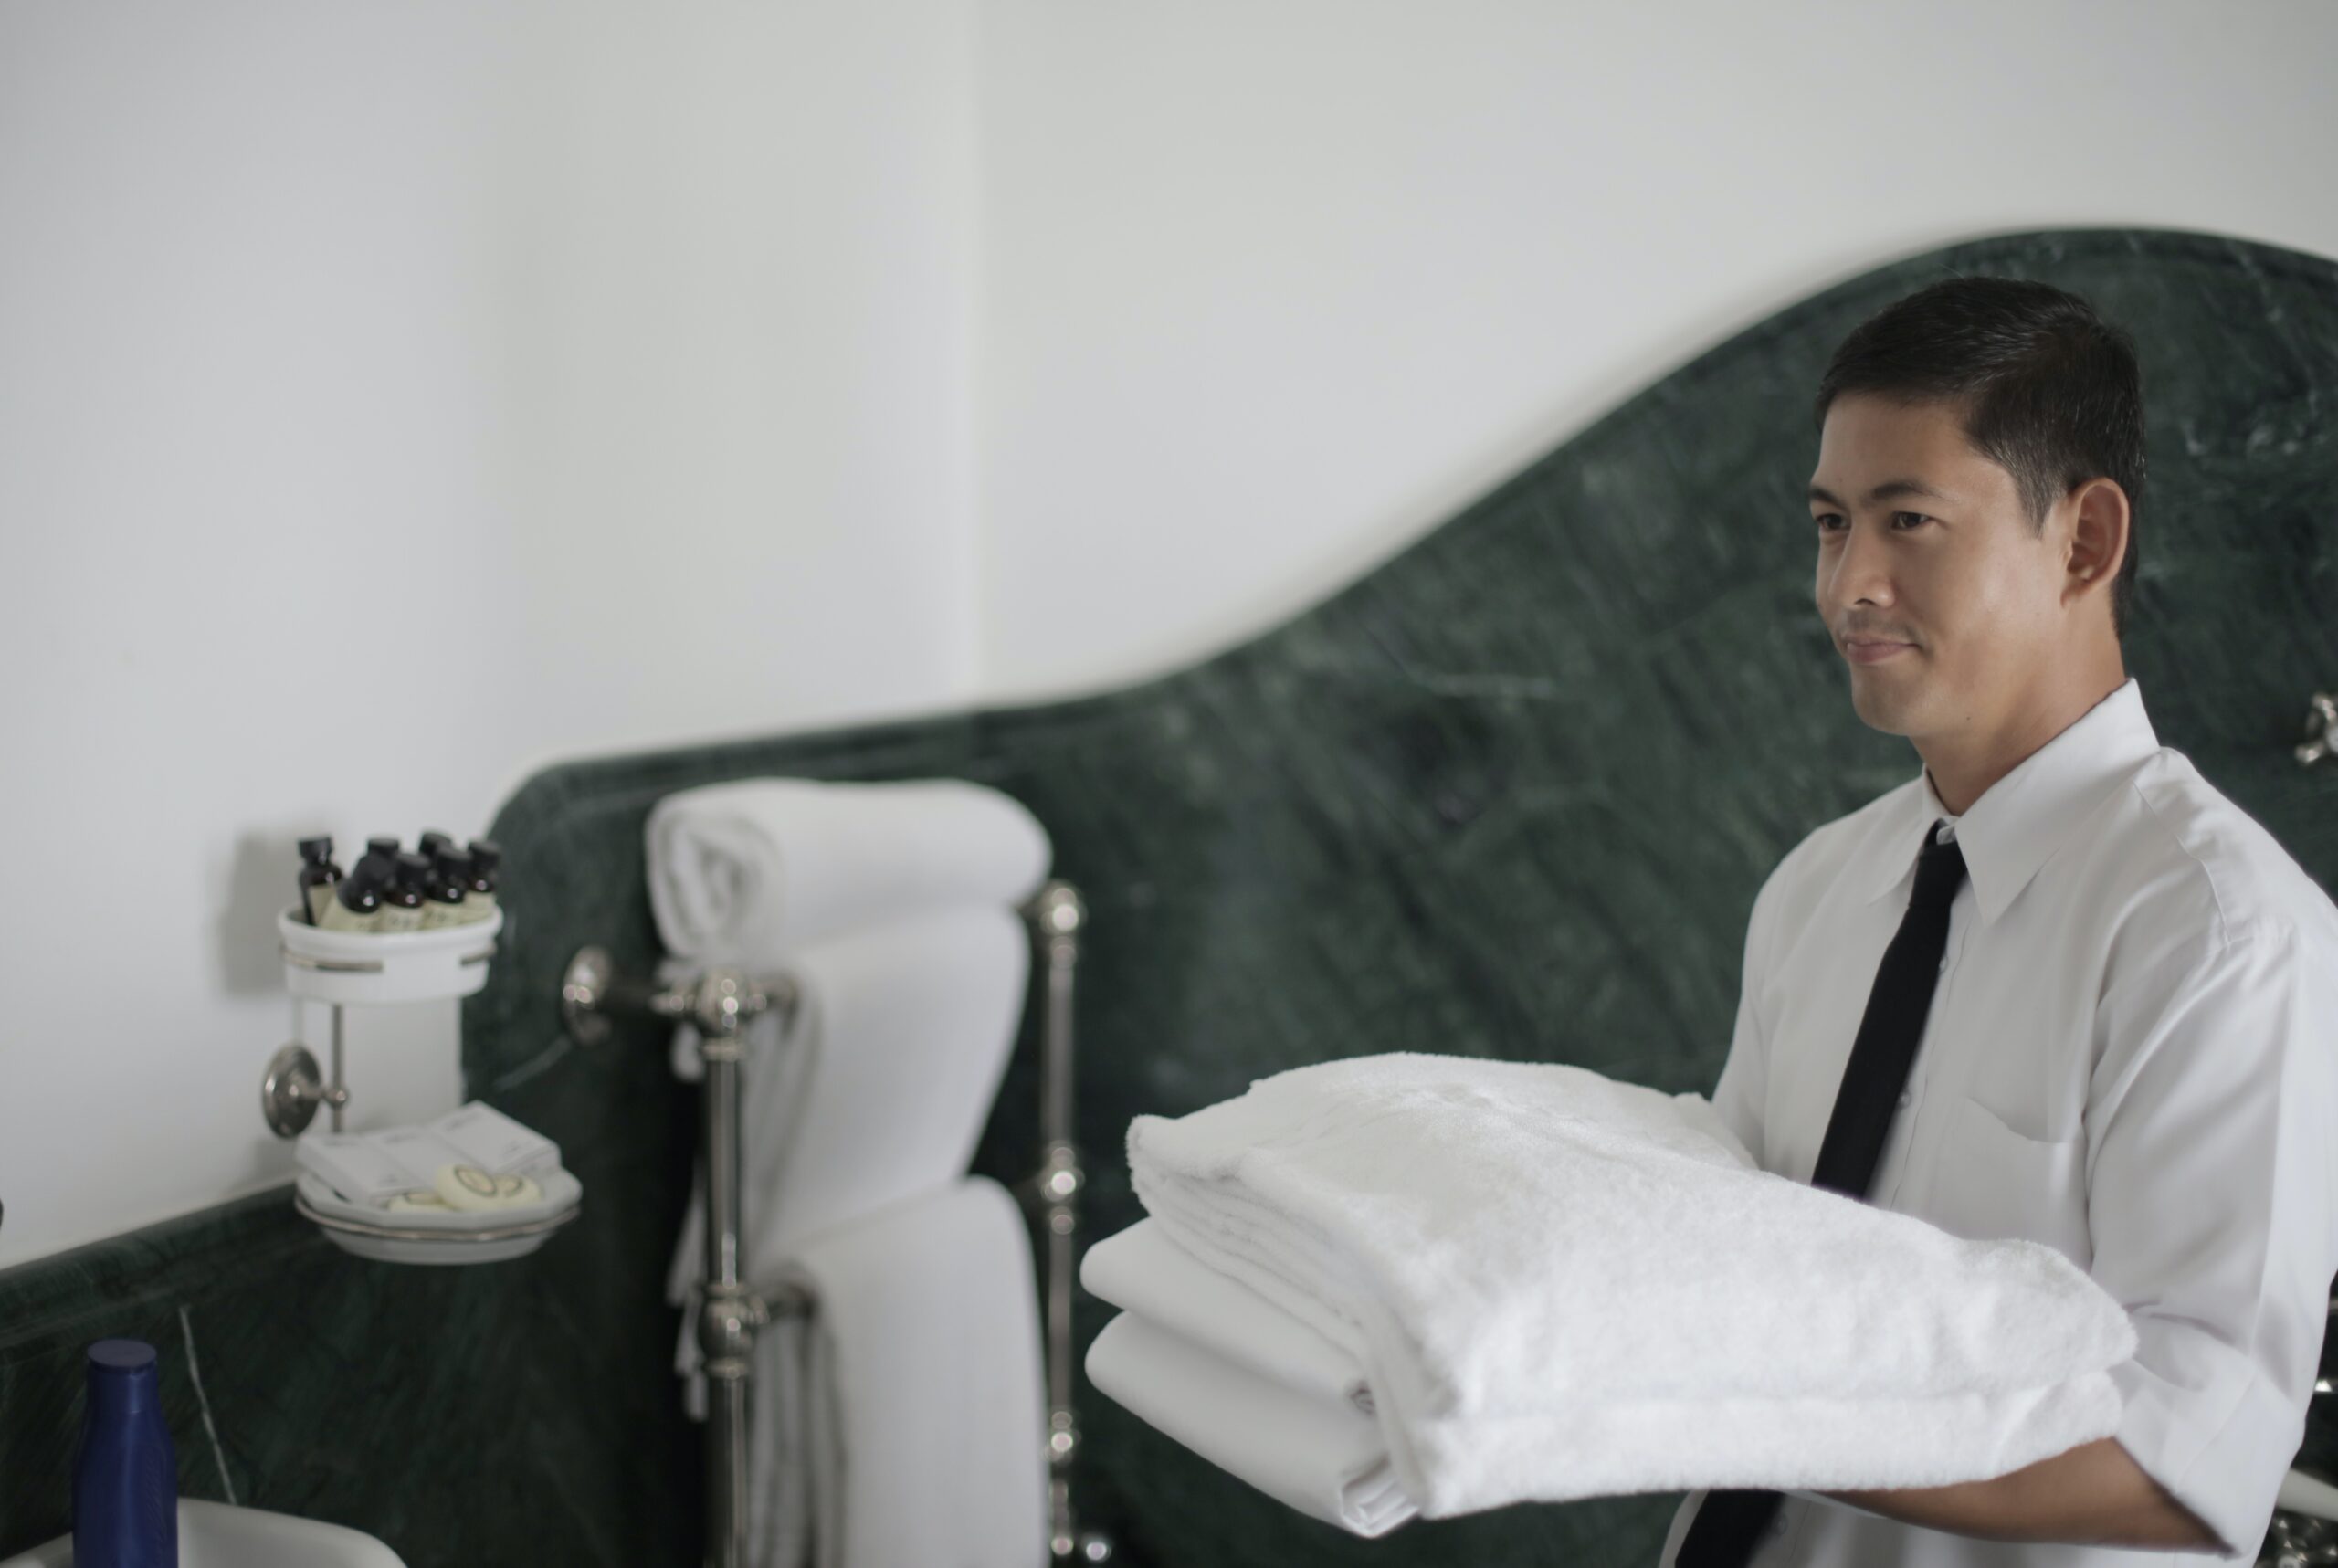 The Connection Between Cleanliness and Guest Satisfaction